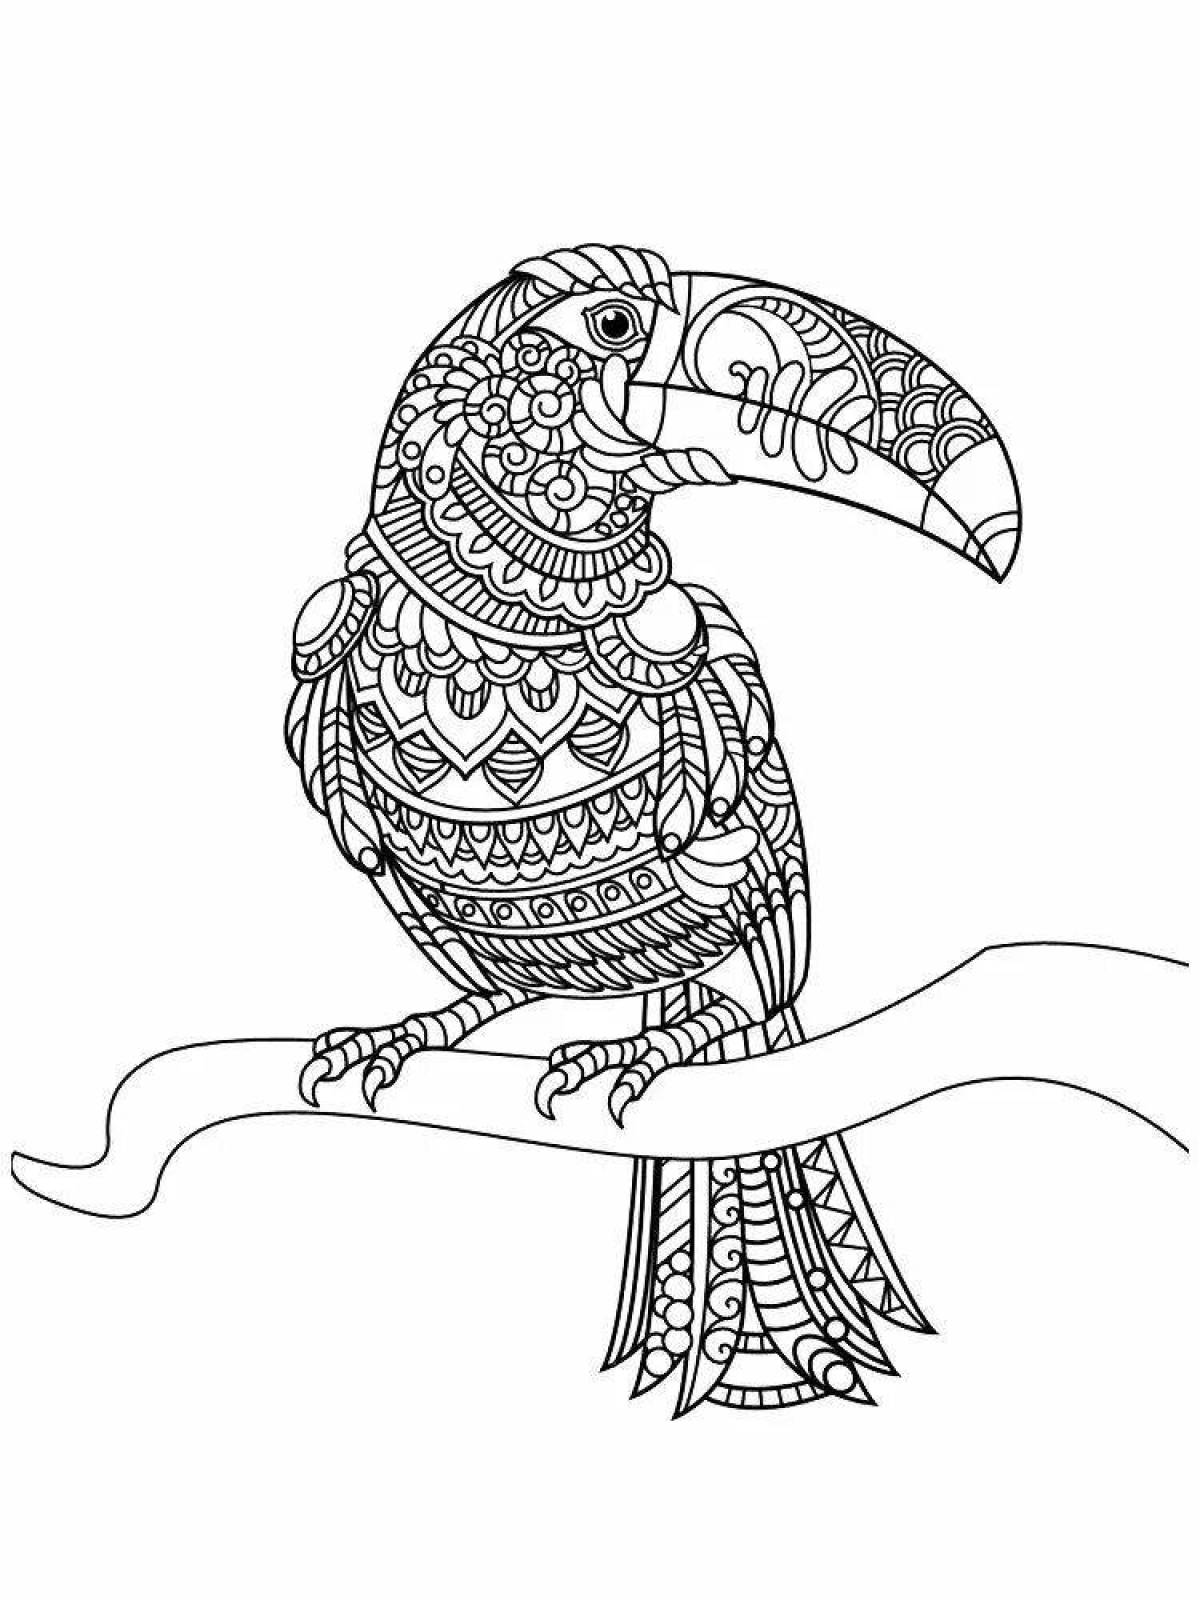 Fancy patterned animal coloring pages